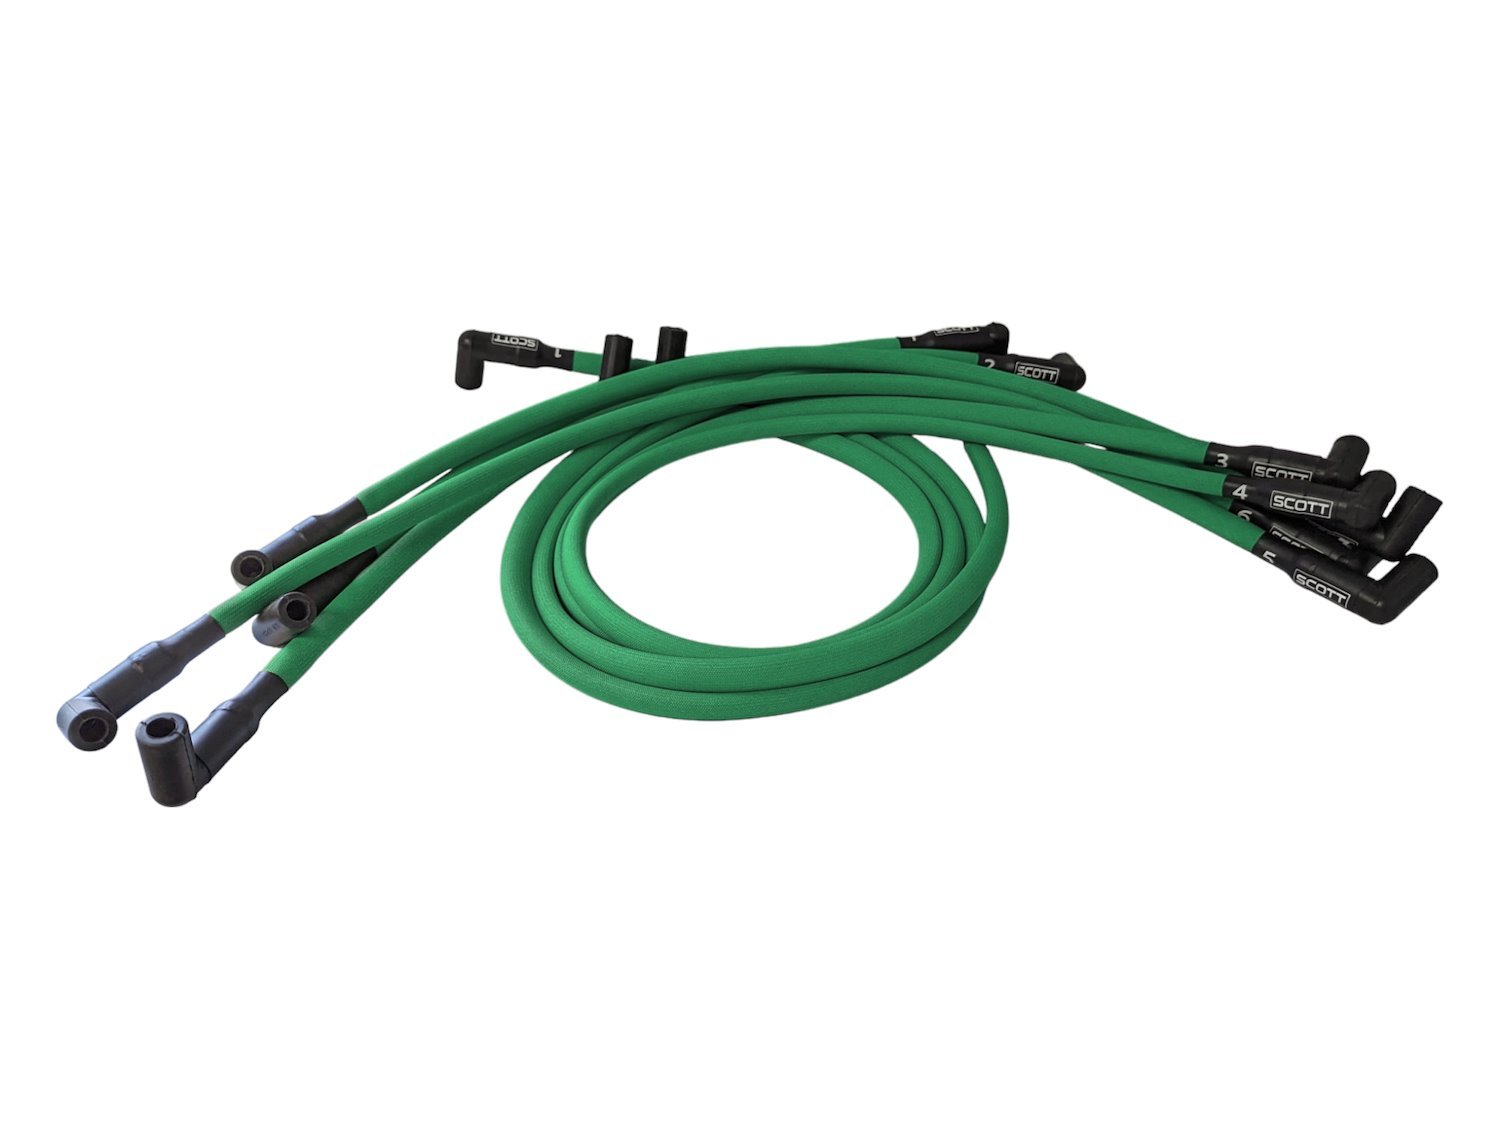 SPW-PS-416-4 High-Performance Fiberglass-Oversleeved Spark Plug Wire Set for Big Block Chevy, Under Header [Green]